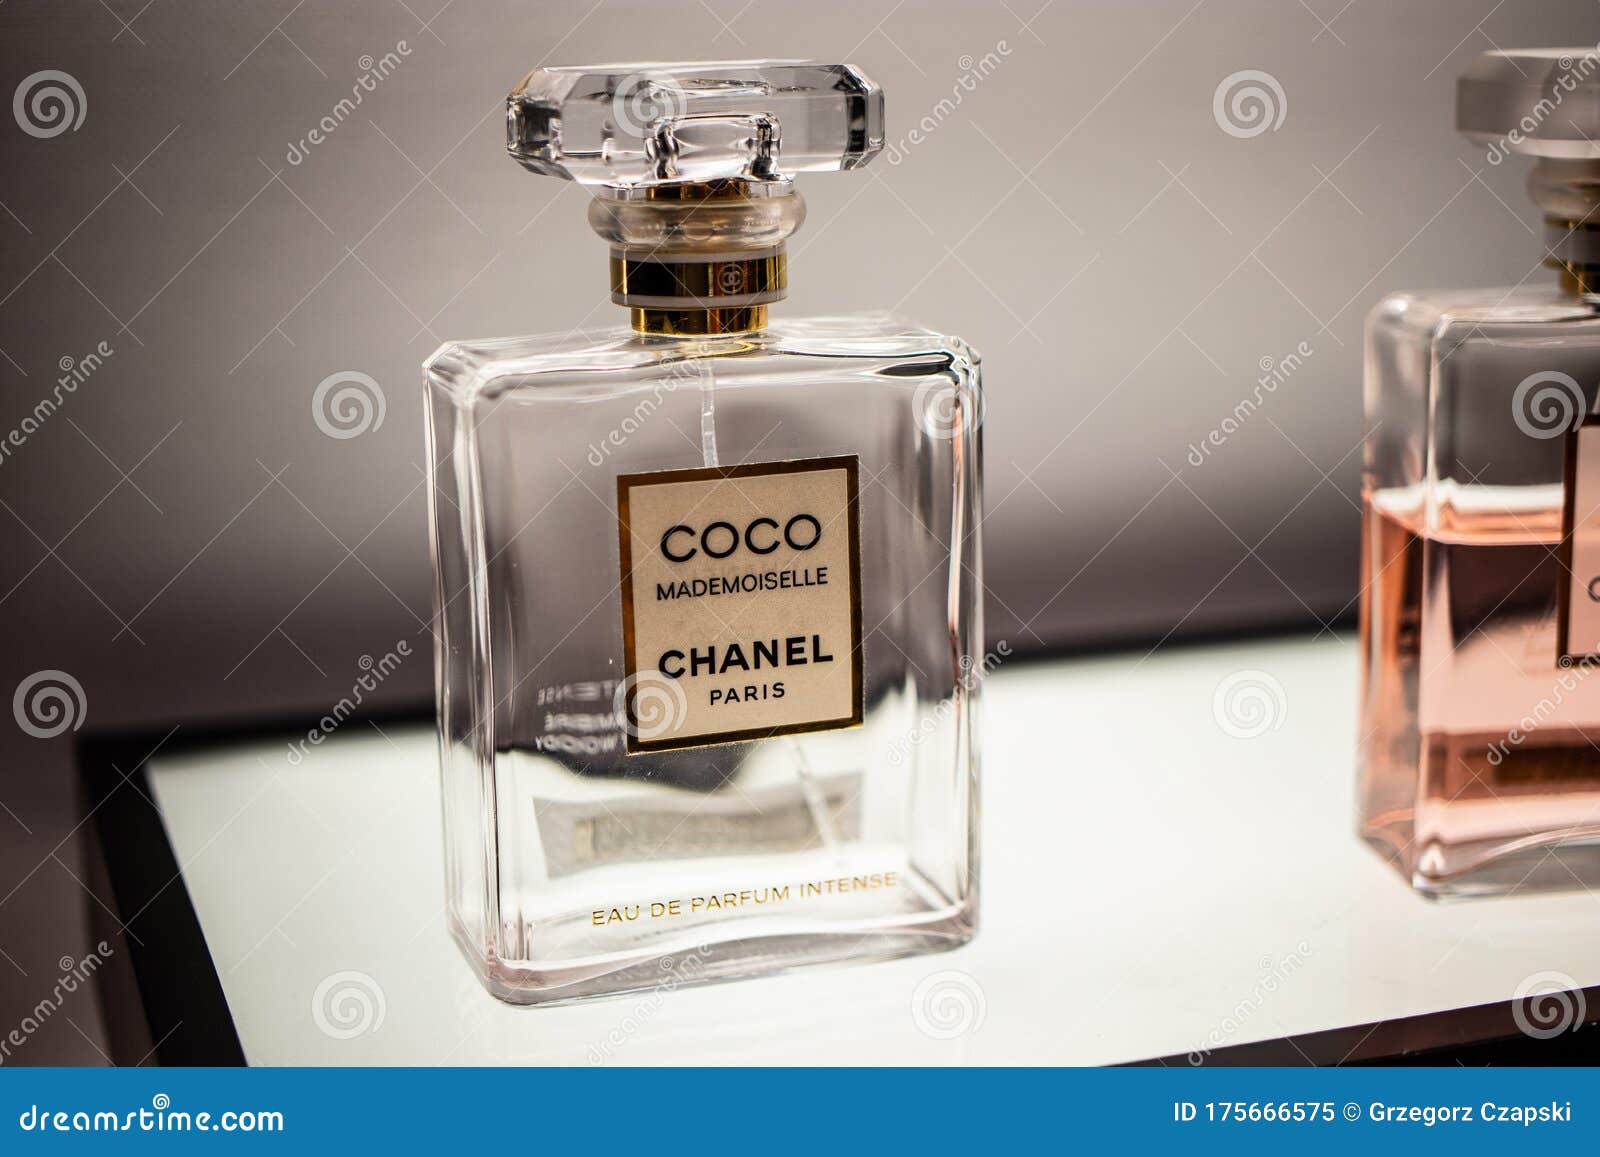 Coco Mademoiselle Chanel Perfume on the Shop Display for Sale